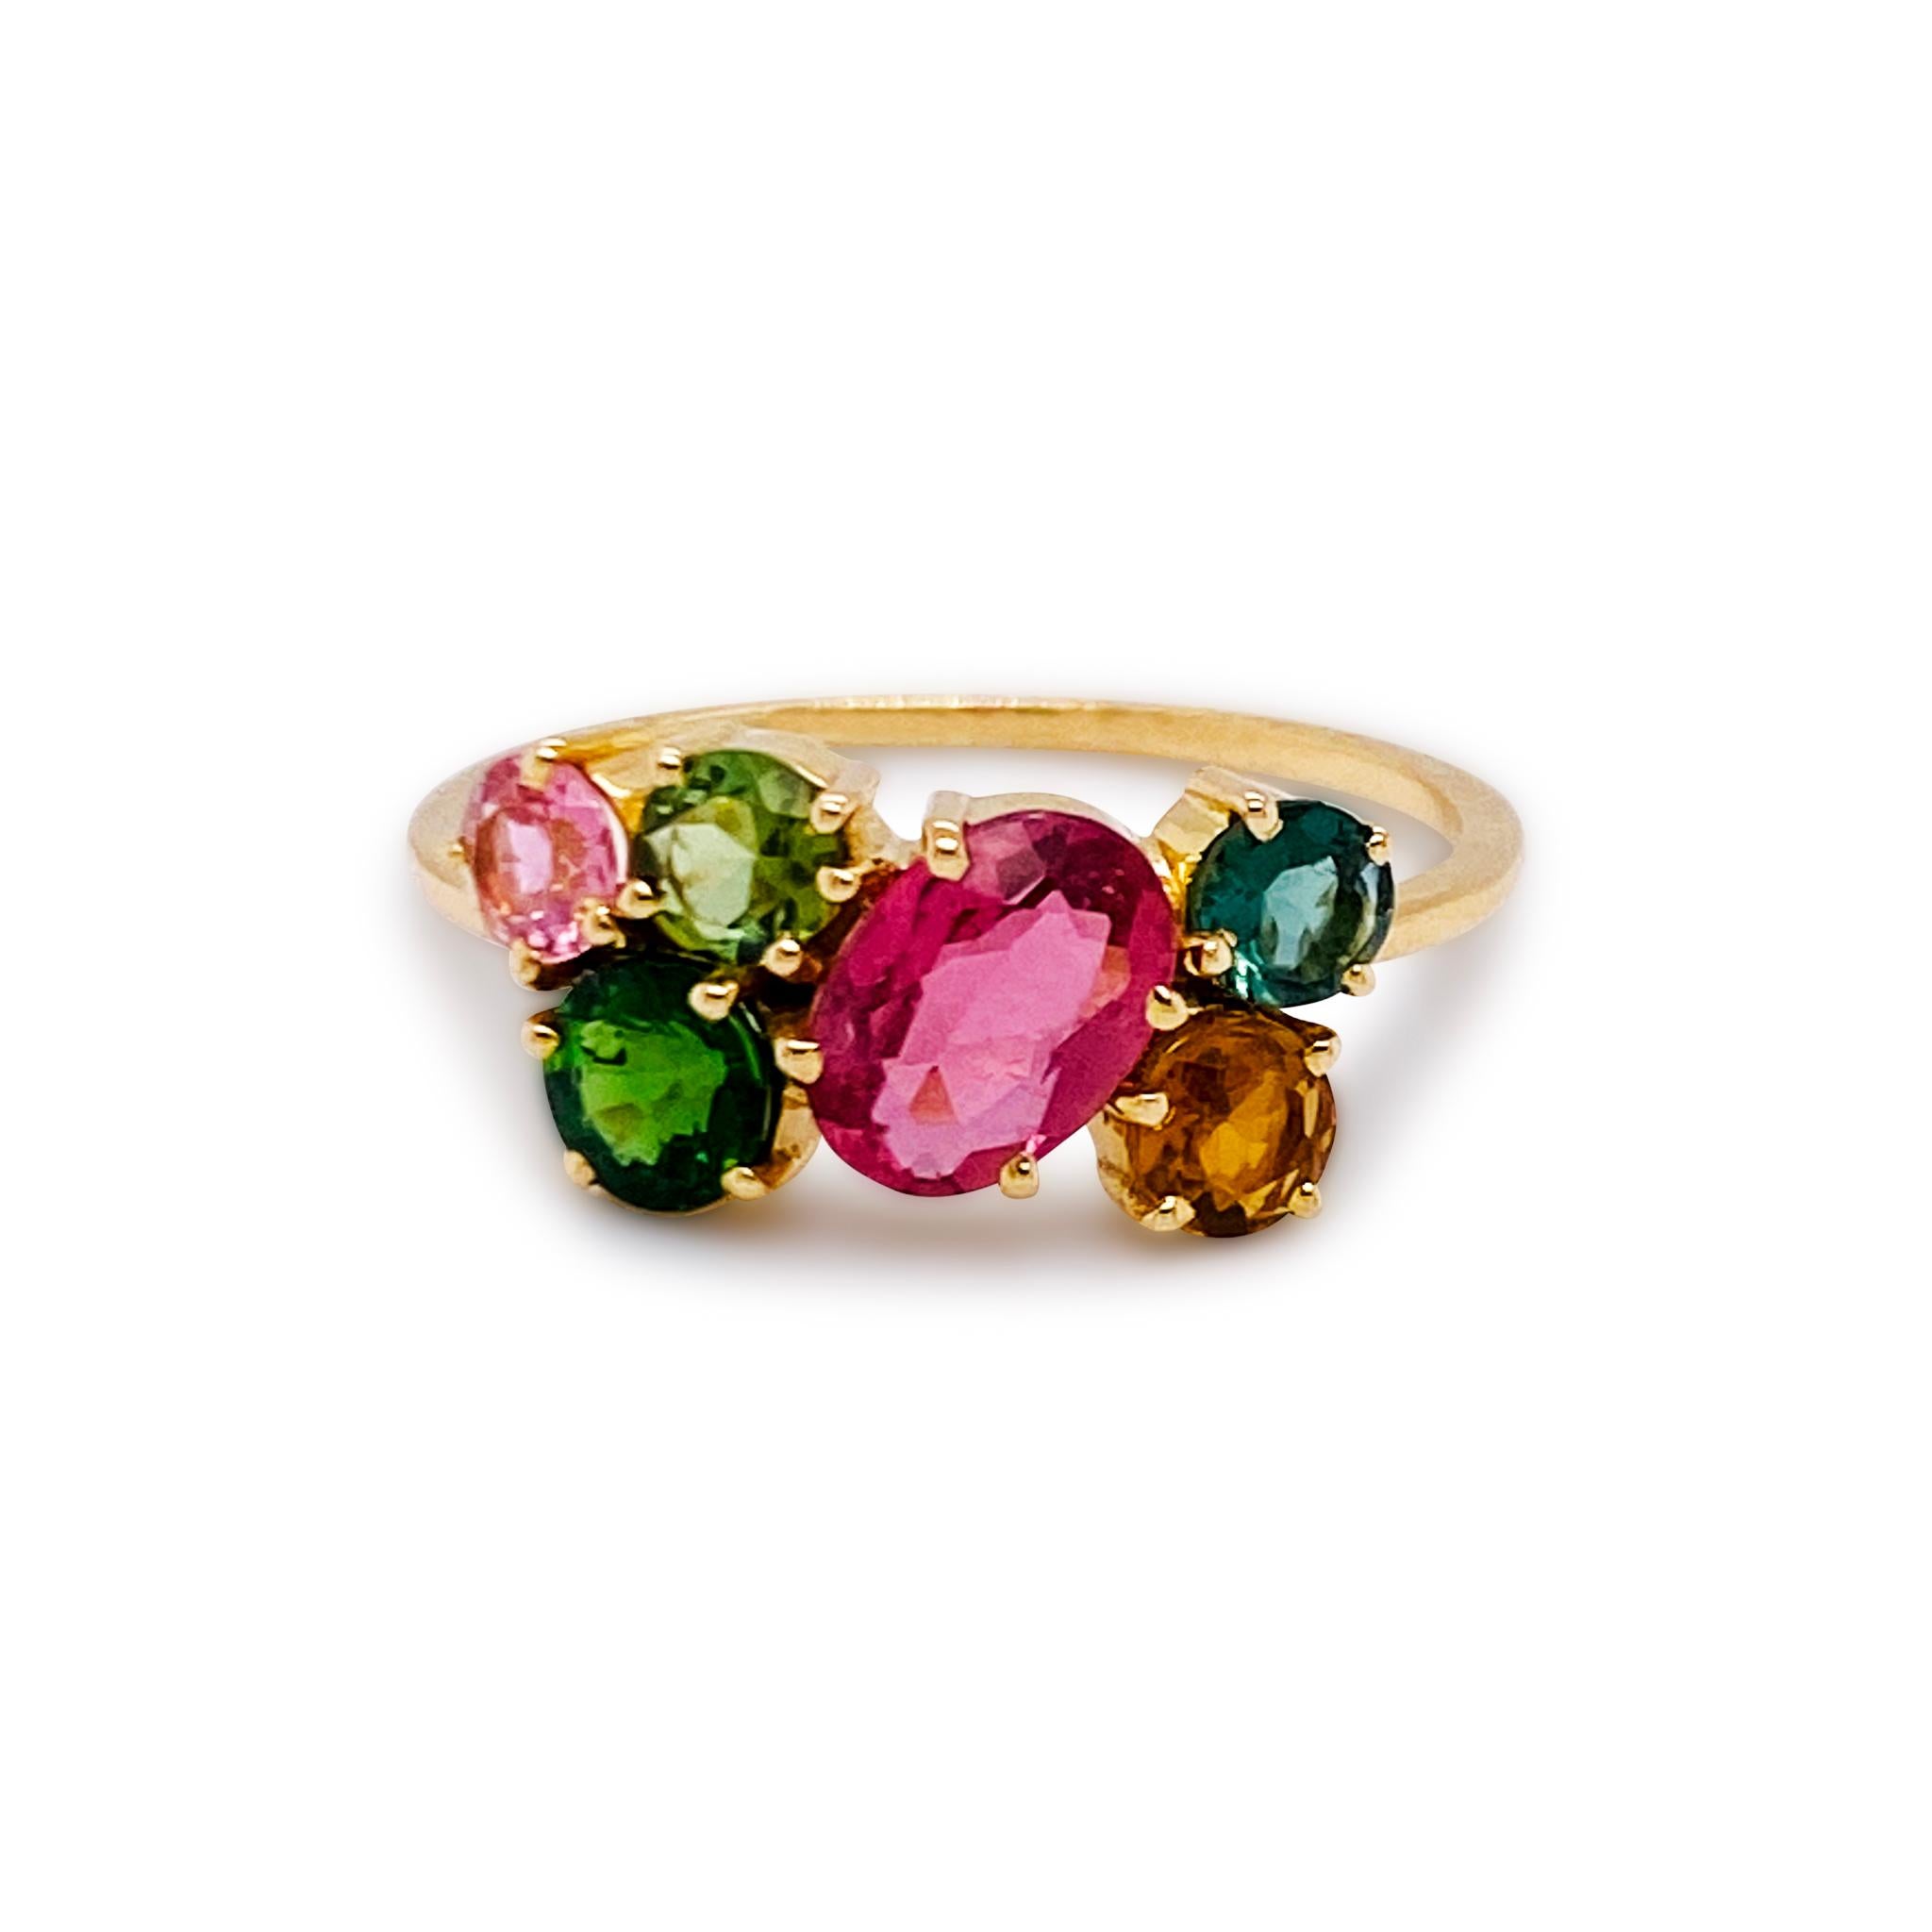 Tresor Beautiful Ring feature 3.2 total carats of Multicolor Stones. The Ring are an ode to the luxurious yet classic beauty with sparkly gemstones and feminine hues. Their contemporary and modern design make them perfect and versatile to be worn at